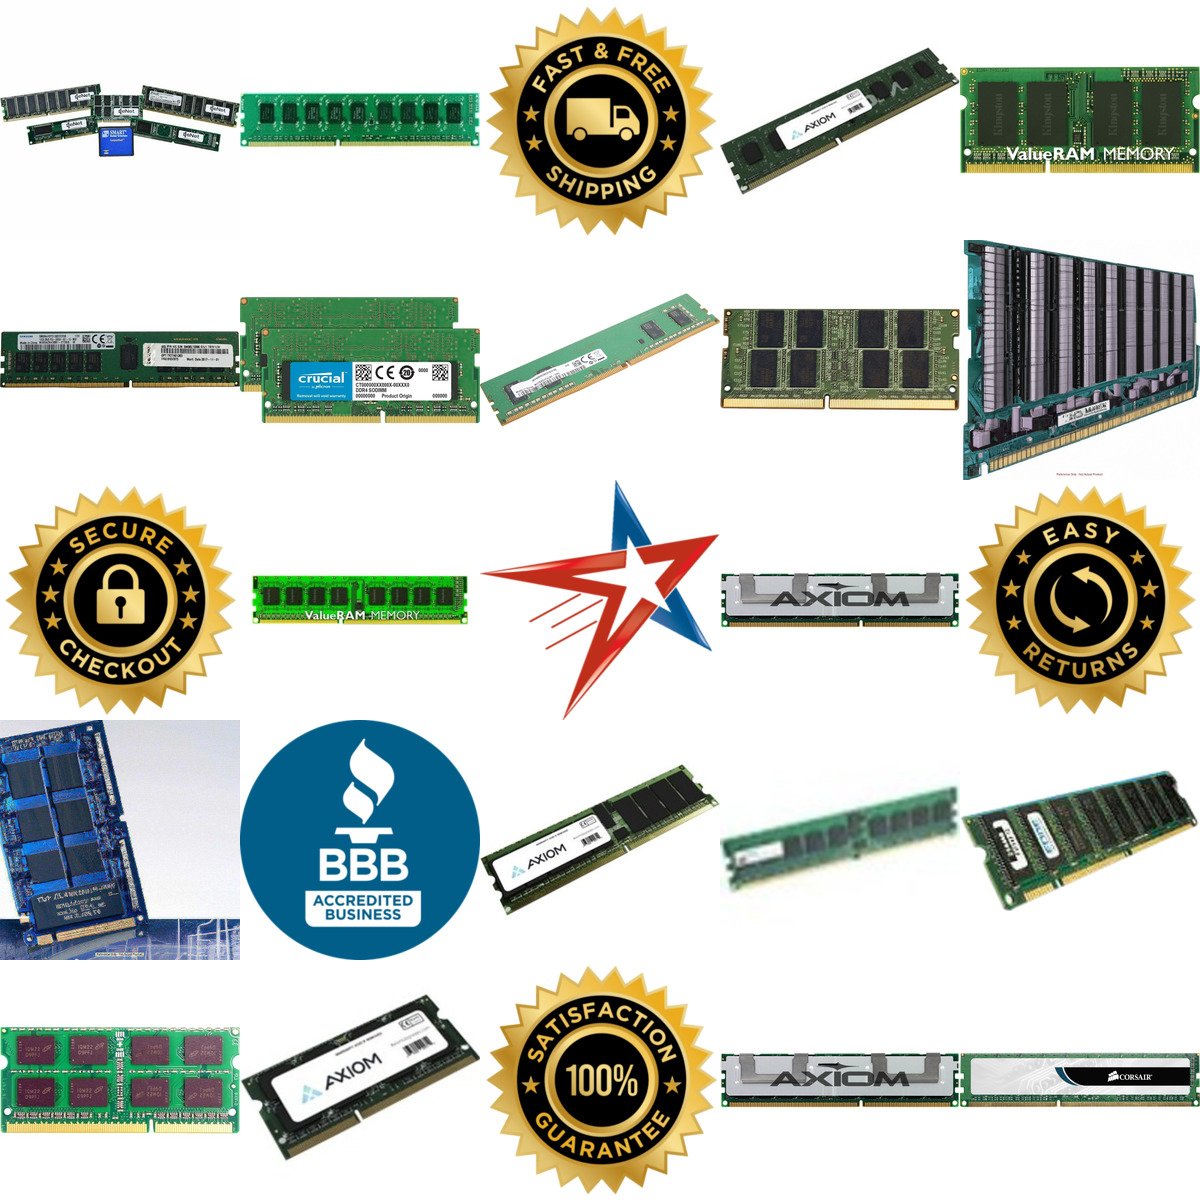 A selection of Server Memory products on GoVets